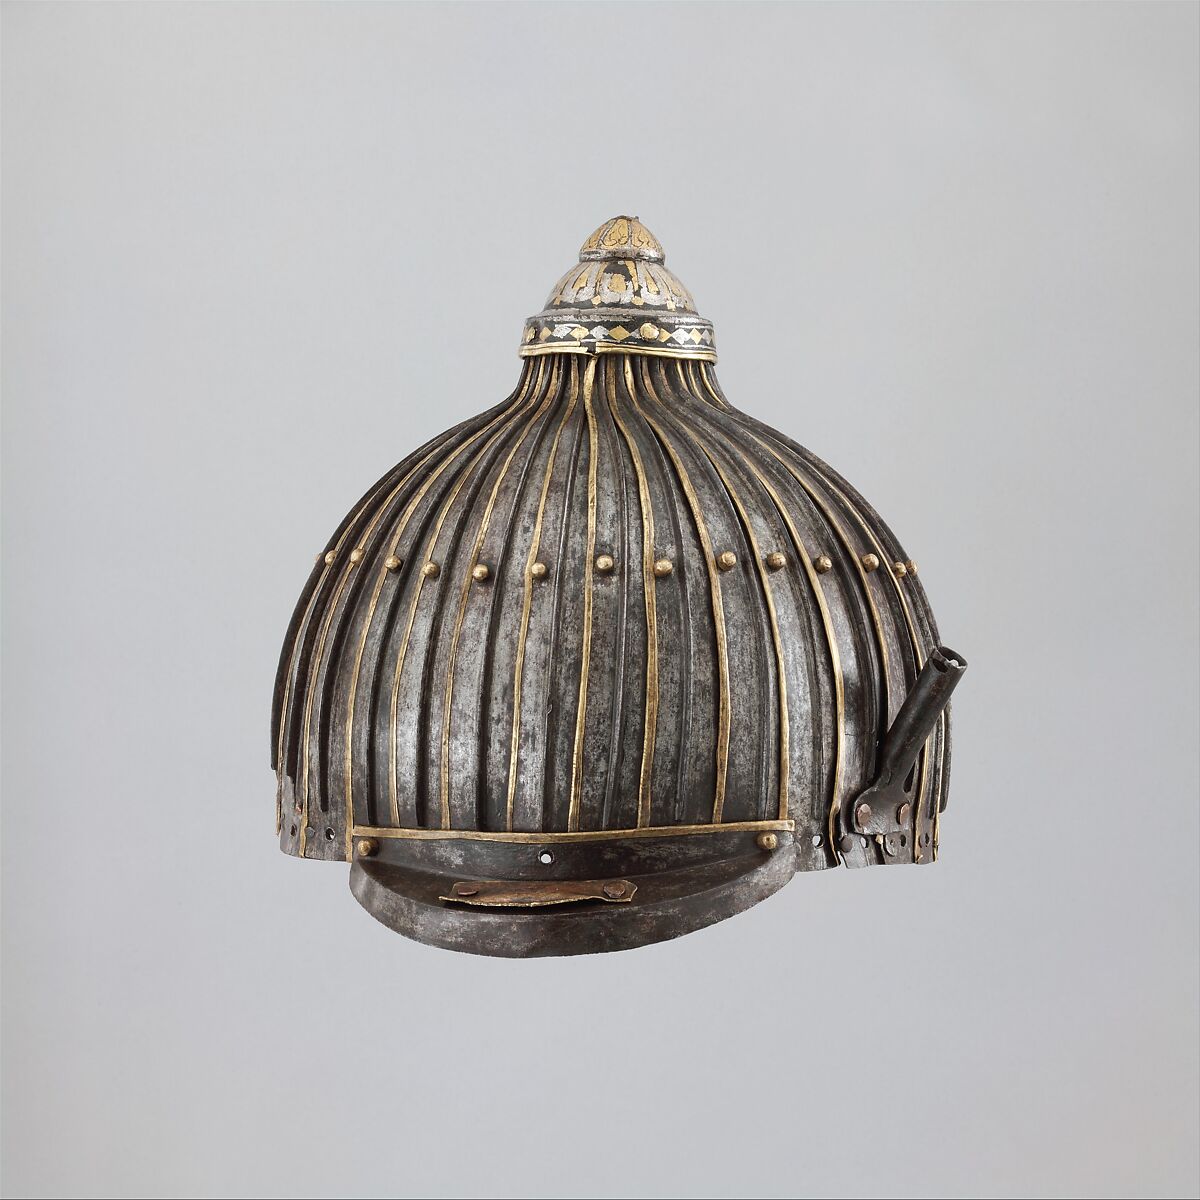 Multi-Plate Helmet of Thirty-One Lames, Iron, gold, silver, brass or copper alloy, Mongolian or Tibetan